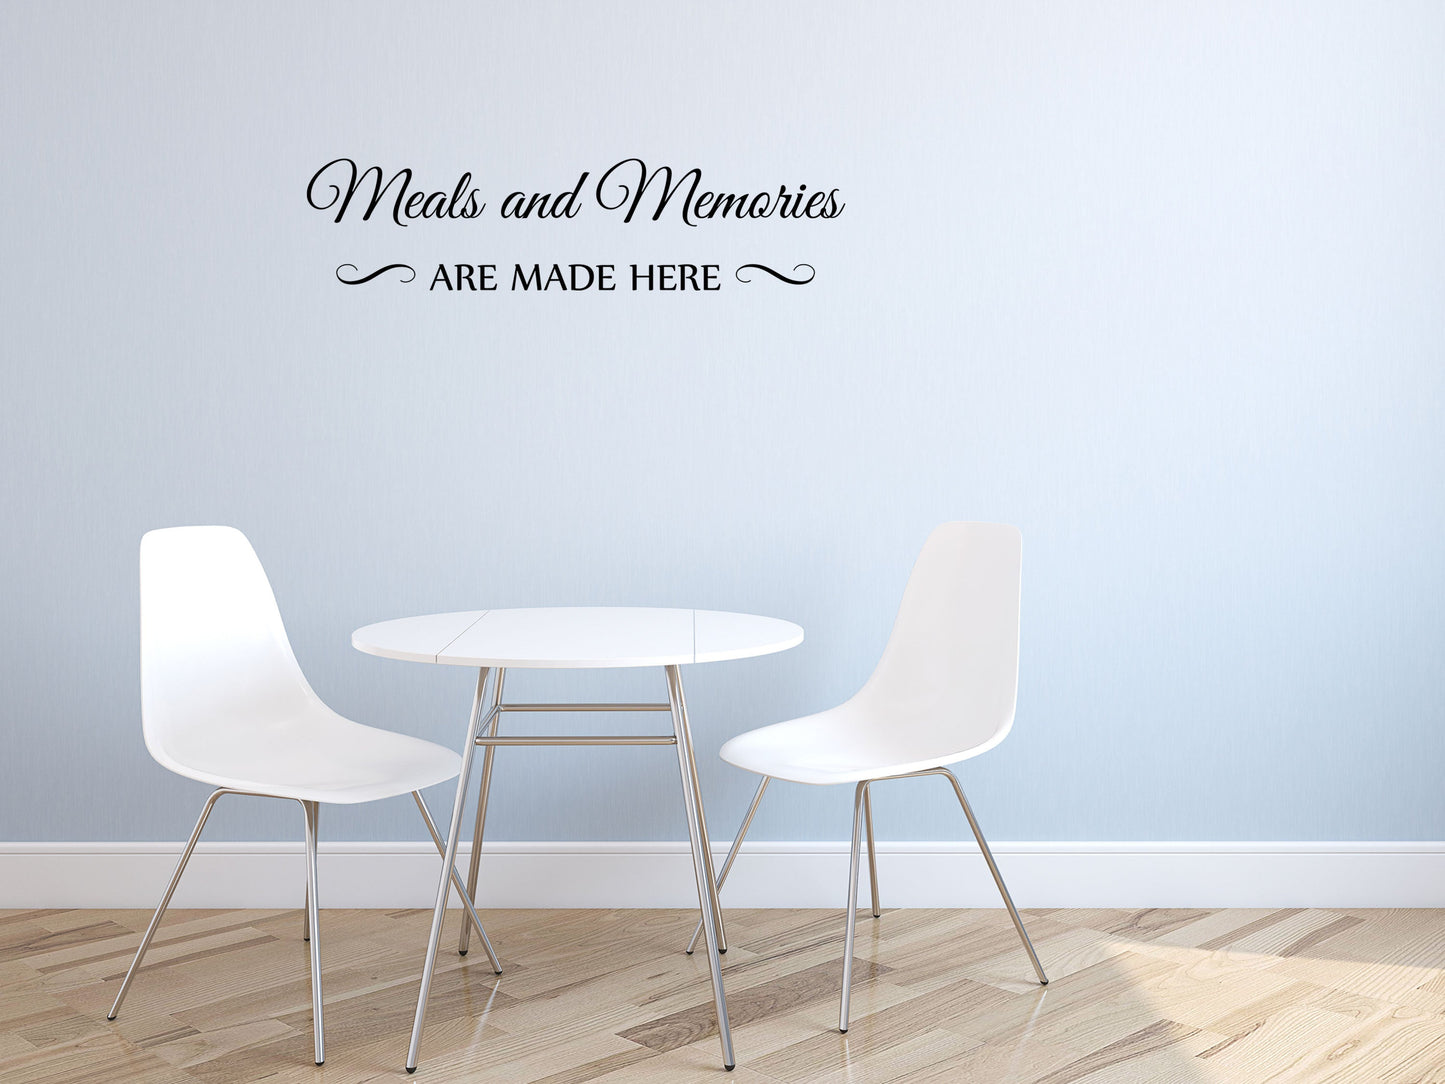 Meals and Memories Are Made Here Vinyl Wall Decal - Dining Room Decal Handmade - Vinyl Wall Art - Vinyl Decals Art - Kitchen Decal Sticker Vinyl Wall Decal Title Done 